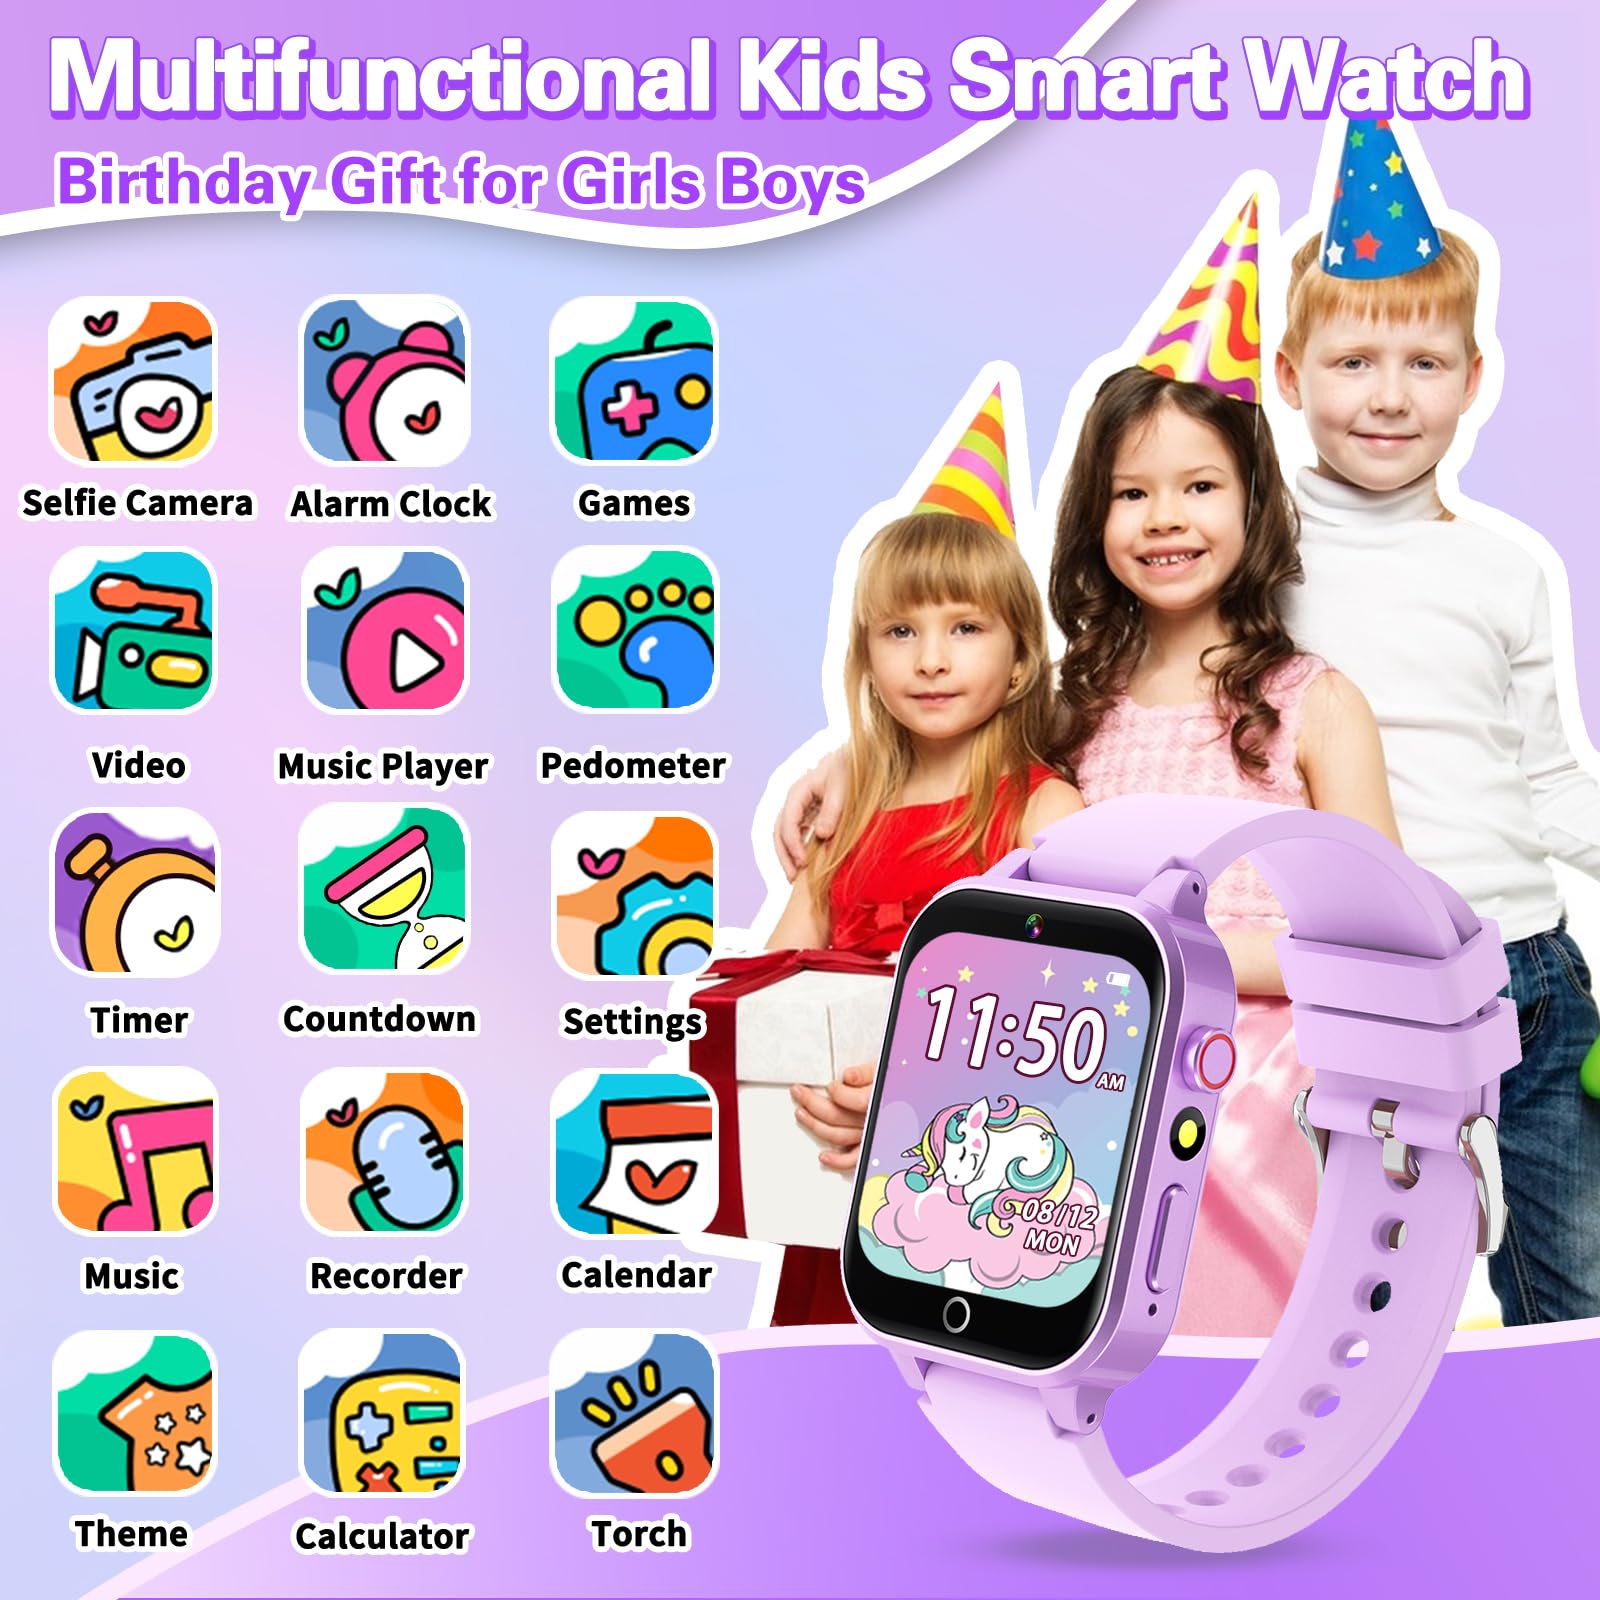 Kids Smart Watch Girls Gift for Girls Age 6-12, HD Touchscreen Kids Watch with 26 Games Camera Video Music Player Pedometer Educational Toys Christmas Birthday Gifts 5 6 7 8 9 10 Year Old Girls